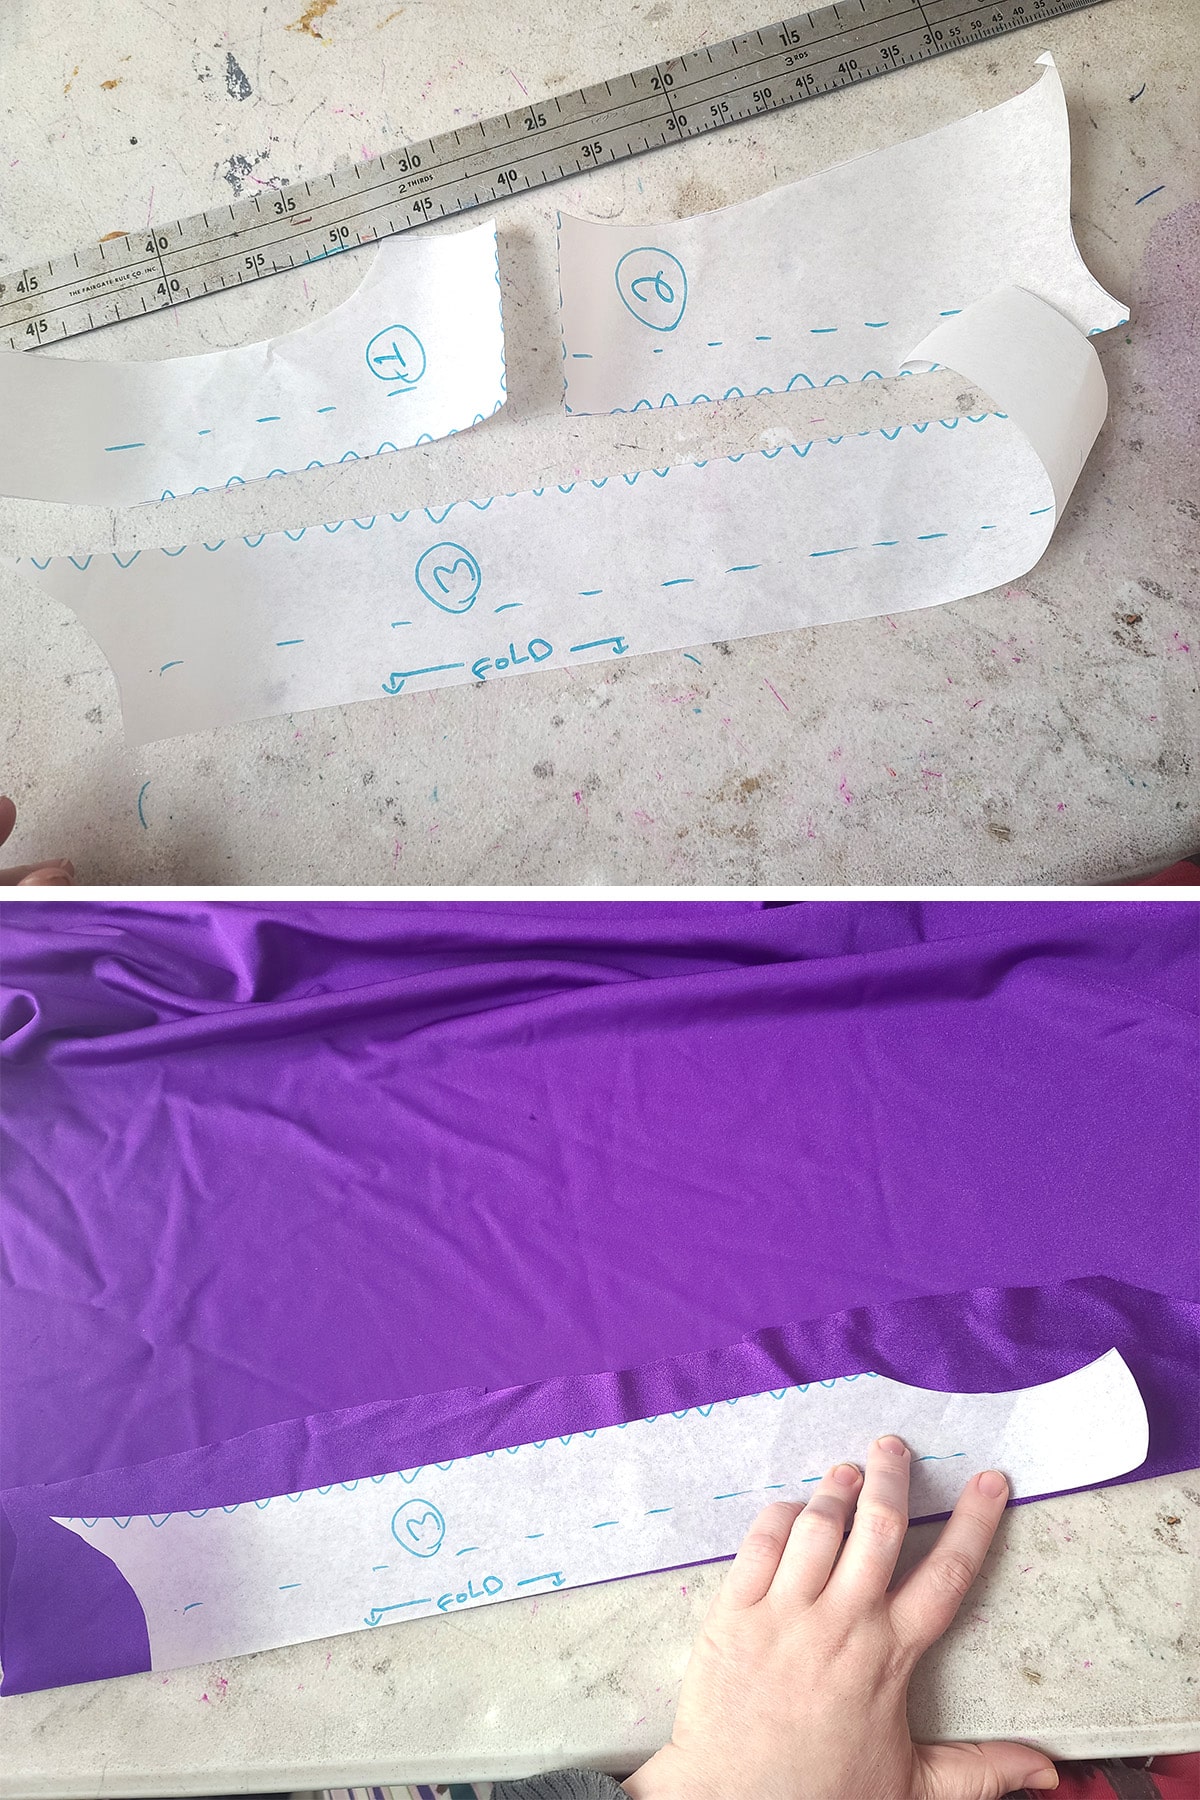 A two part compilation image showing the pattern being cut into 3 piece. The second image shows the center pattern piece being place on the fold of some purple spandex.